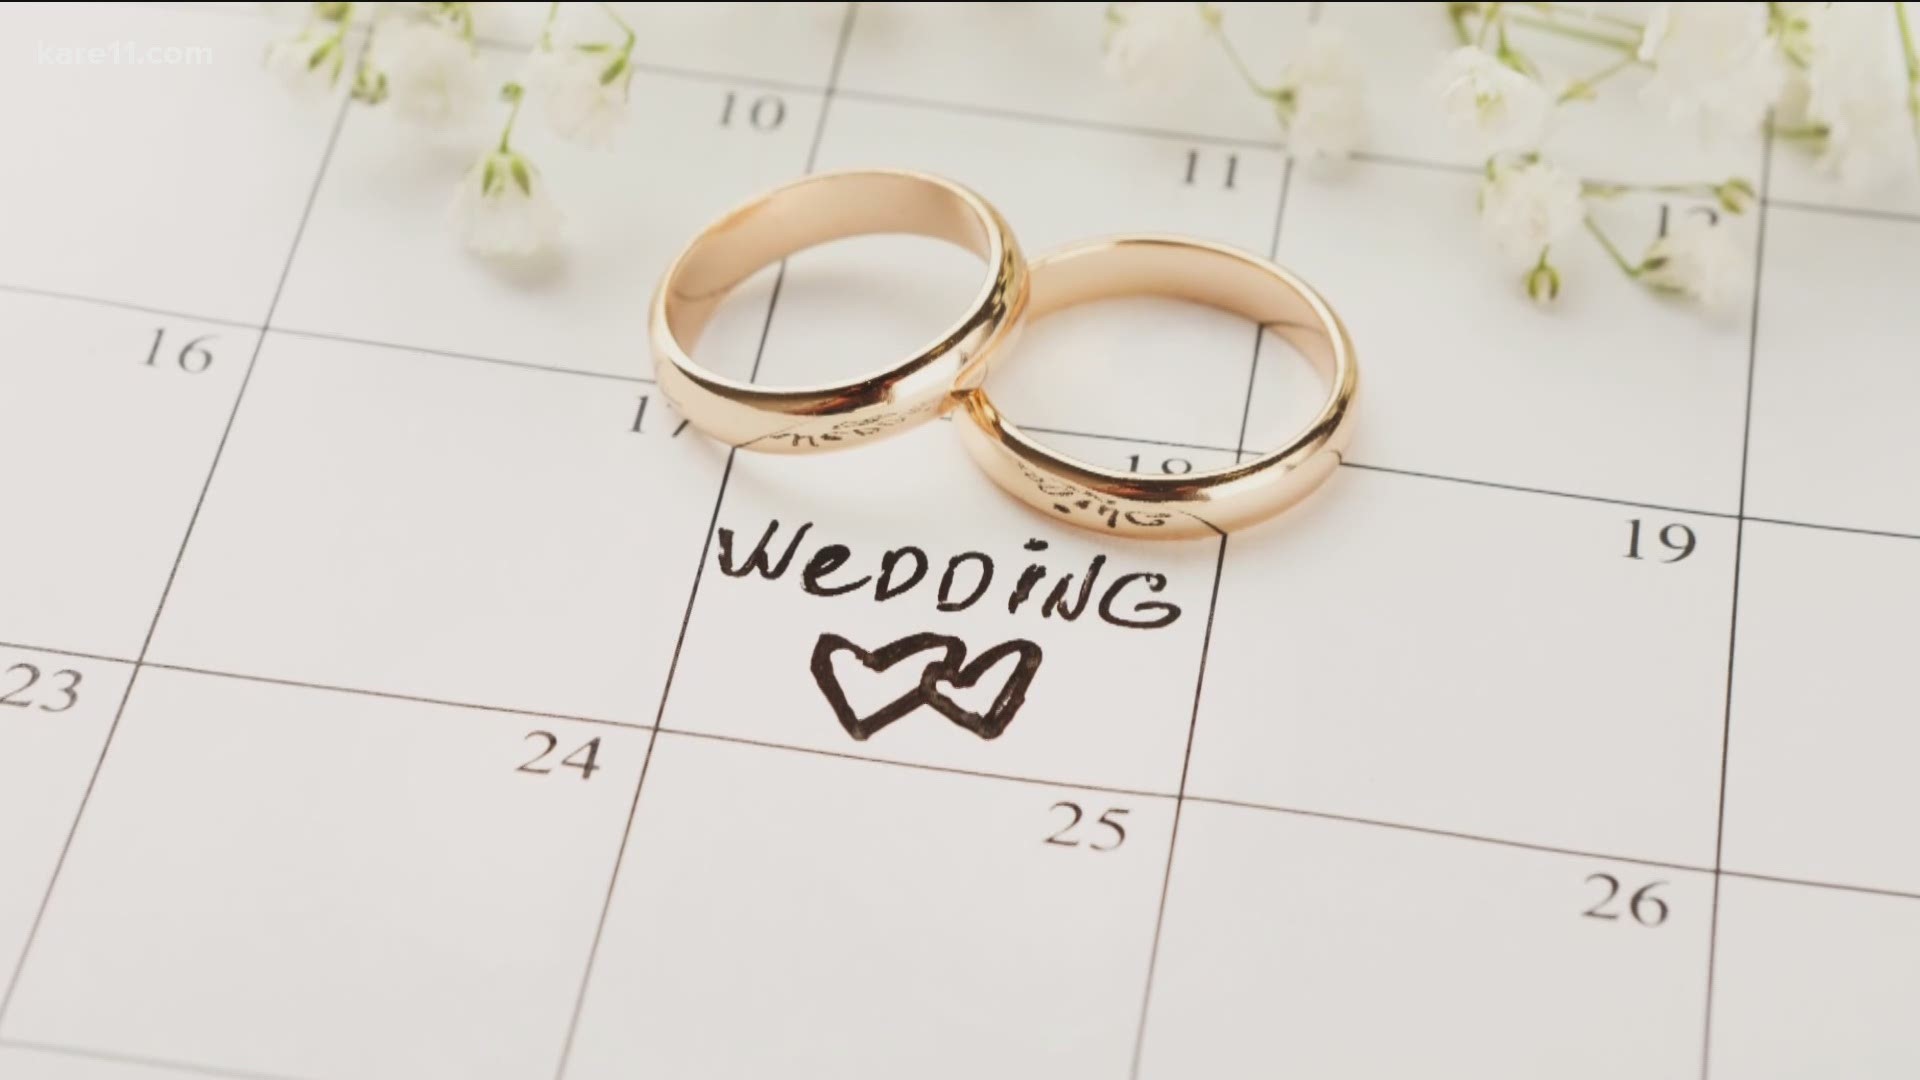 As COVID-19 restrictions are lifted nationwide, wedding planners say couples that previously postponed weddings, are competing with those who are recently engaged.